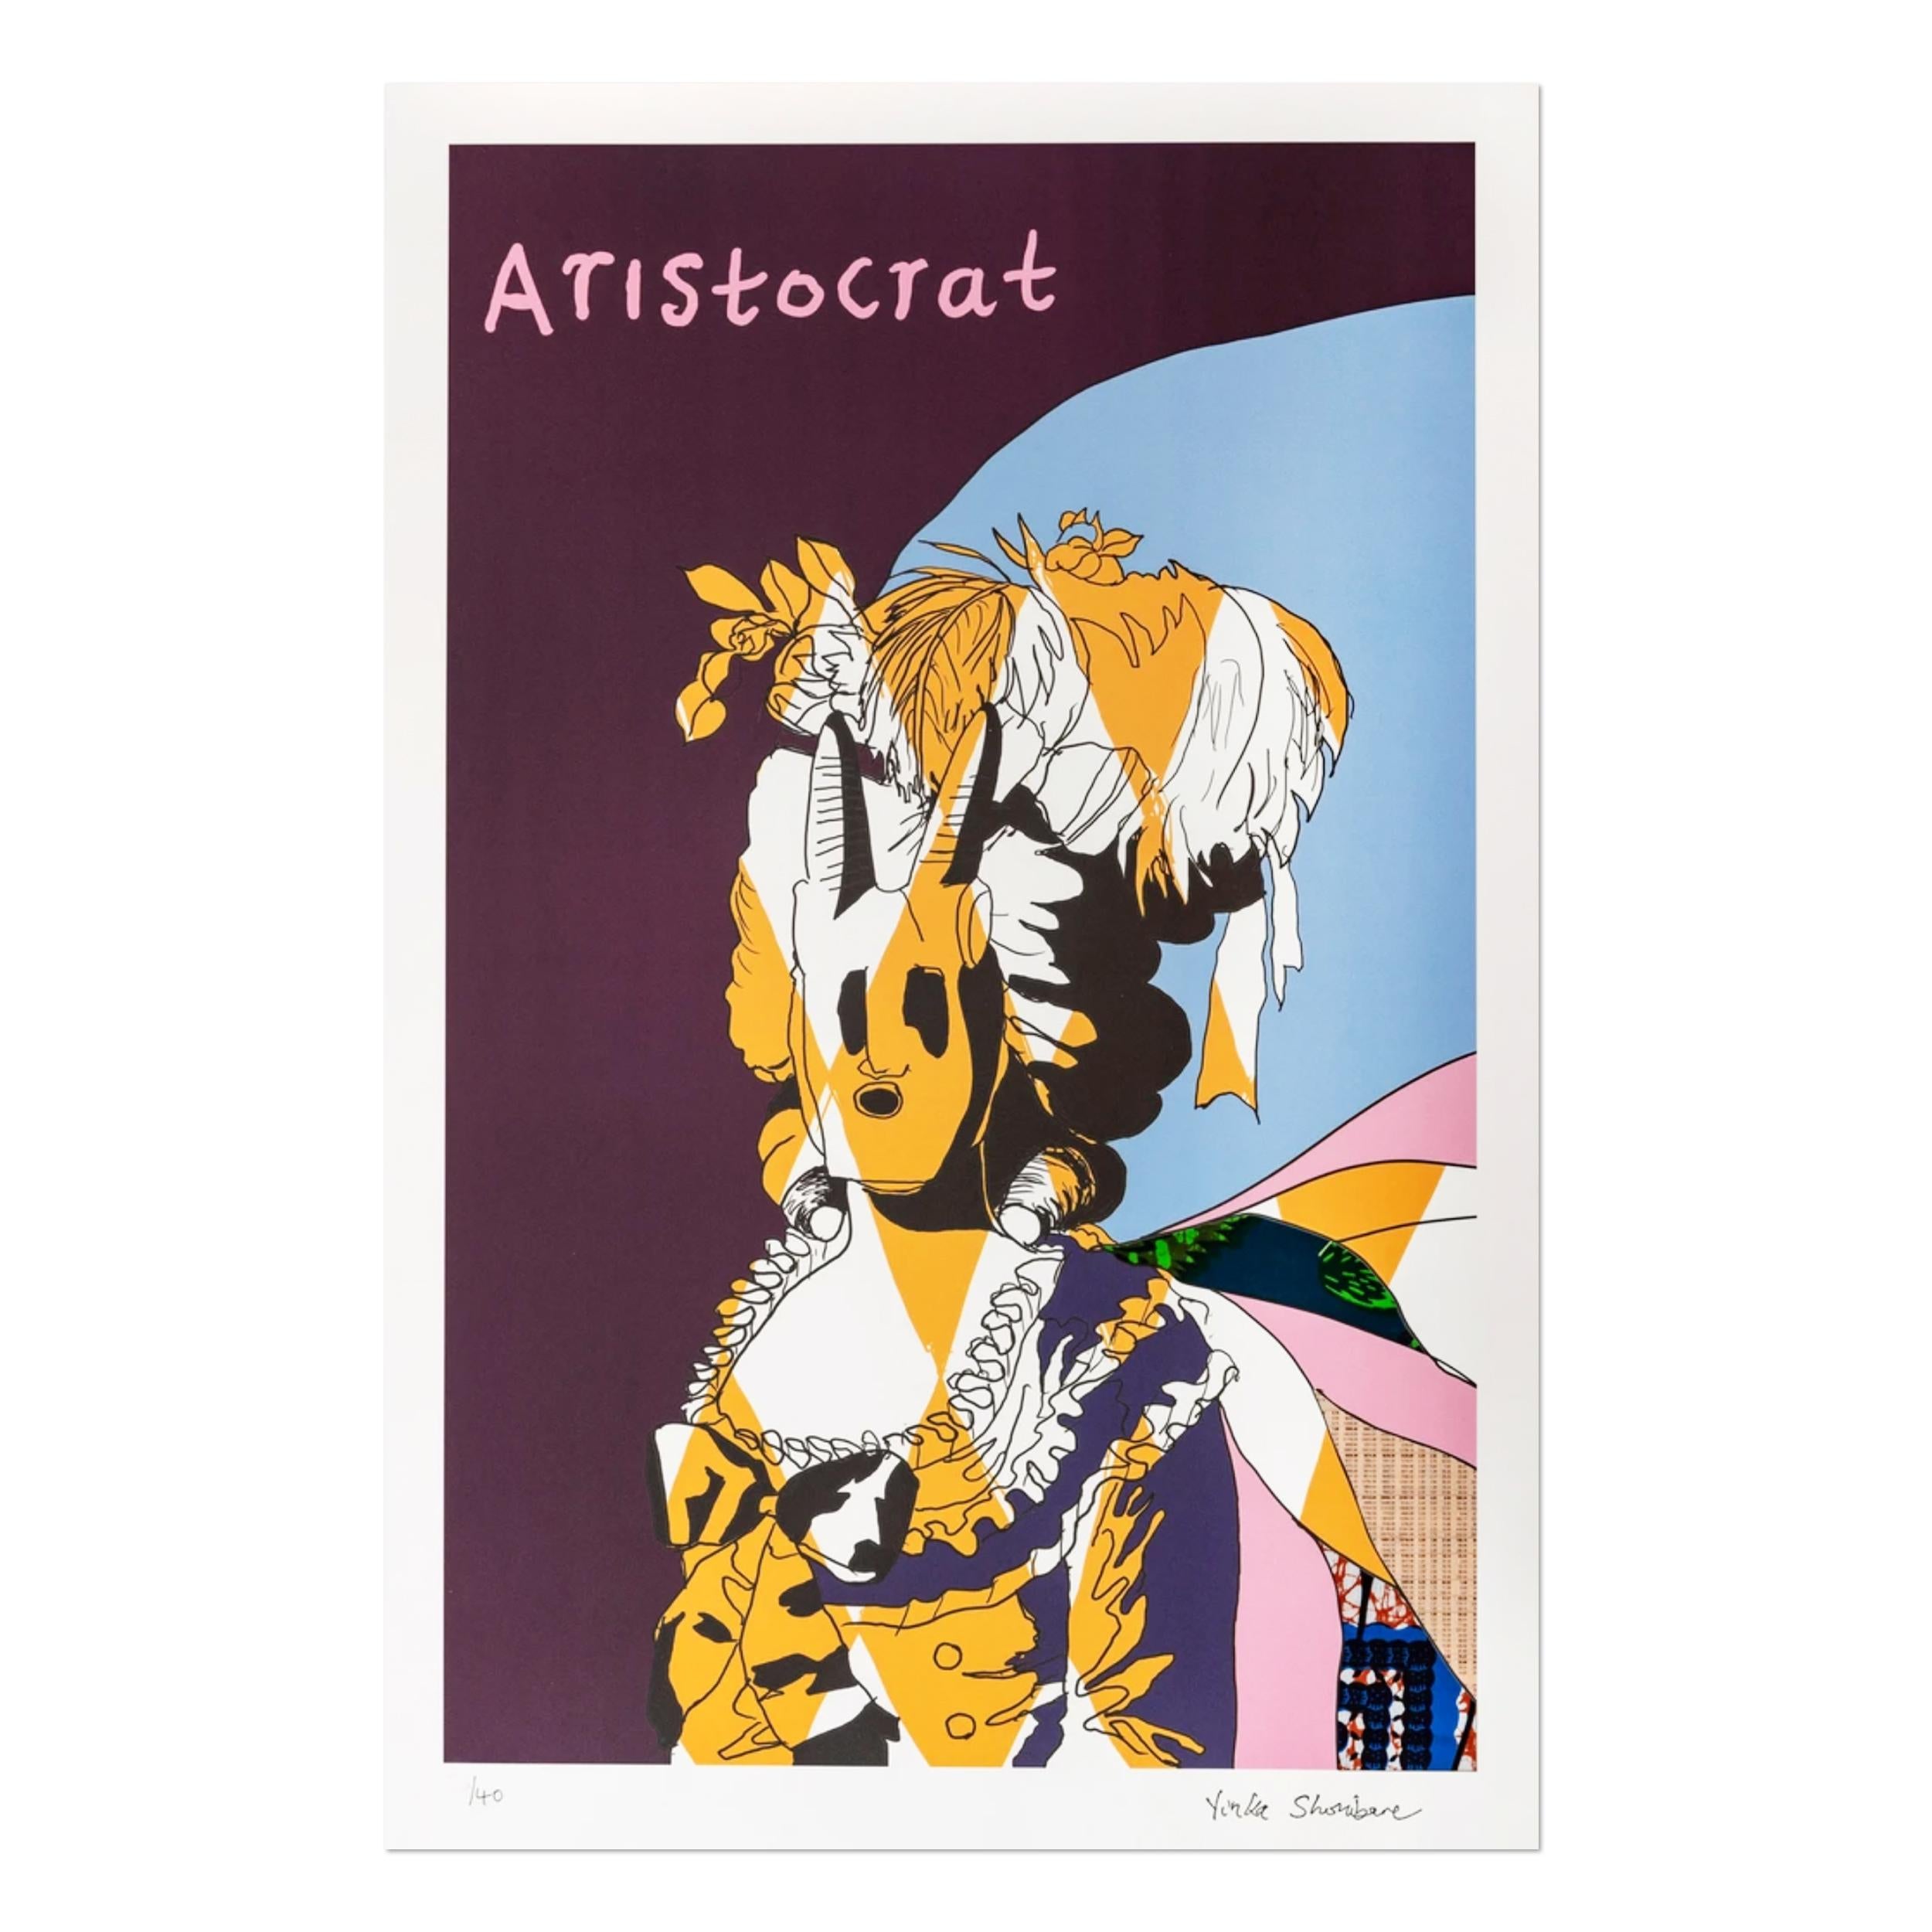 Yinka Shonibare CBE (British, b. 1962)
Aristocrat in Blue, 2020
Medium: Lithograph with collage 
Dimensions: 76 x 49.5 cm
Edition of 40 (slightly varying due to collage elements): Hand-stamped signature and numbered 
Condition: Mint
